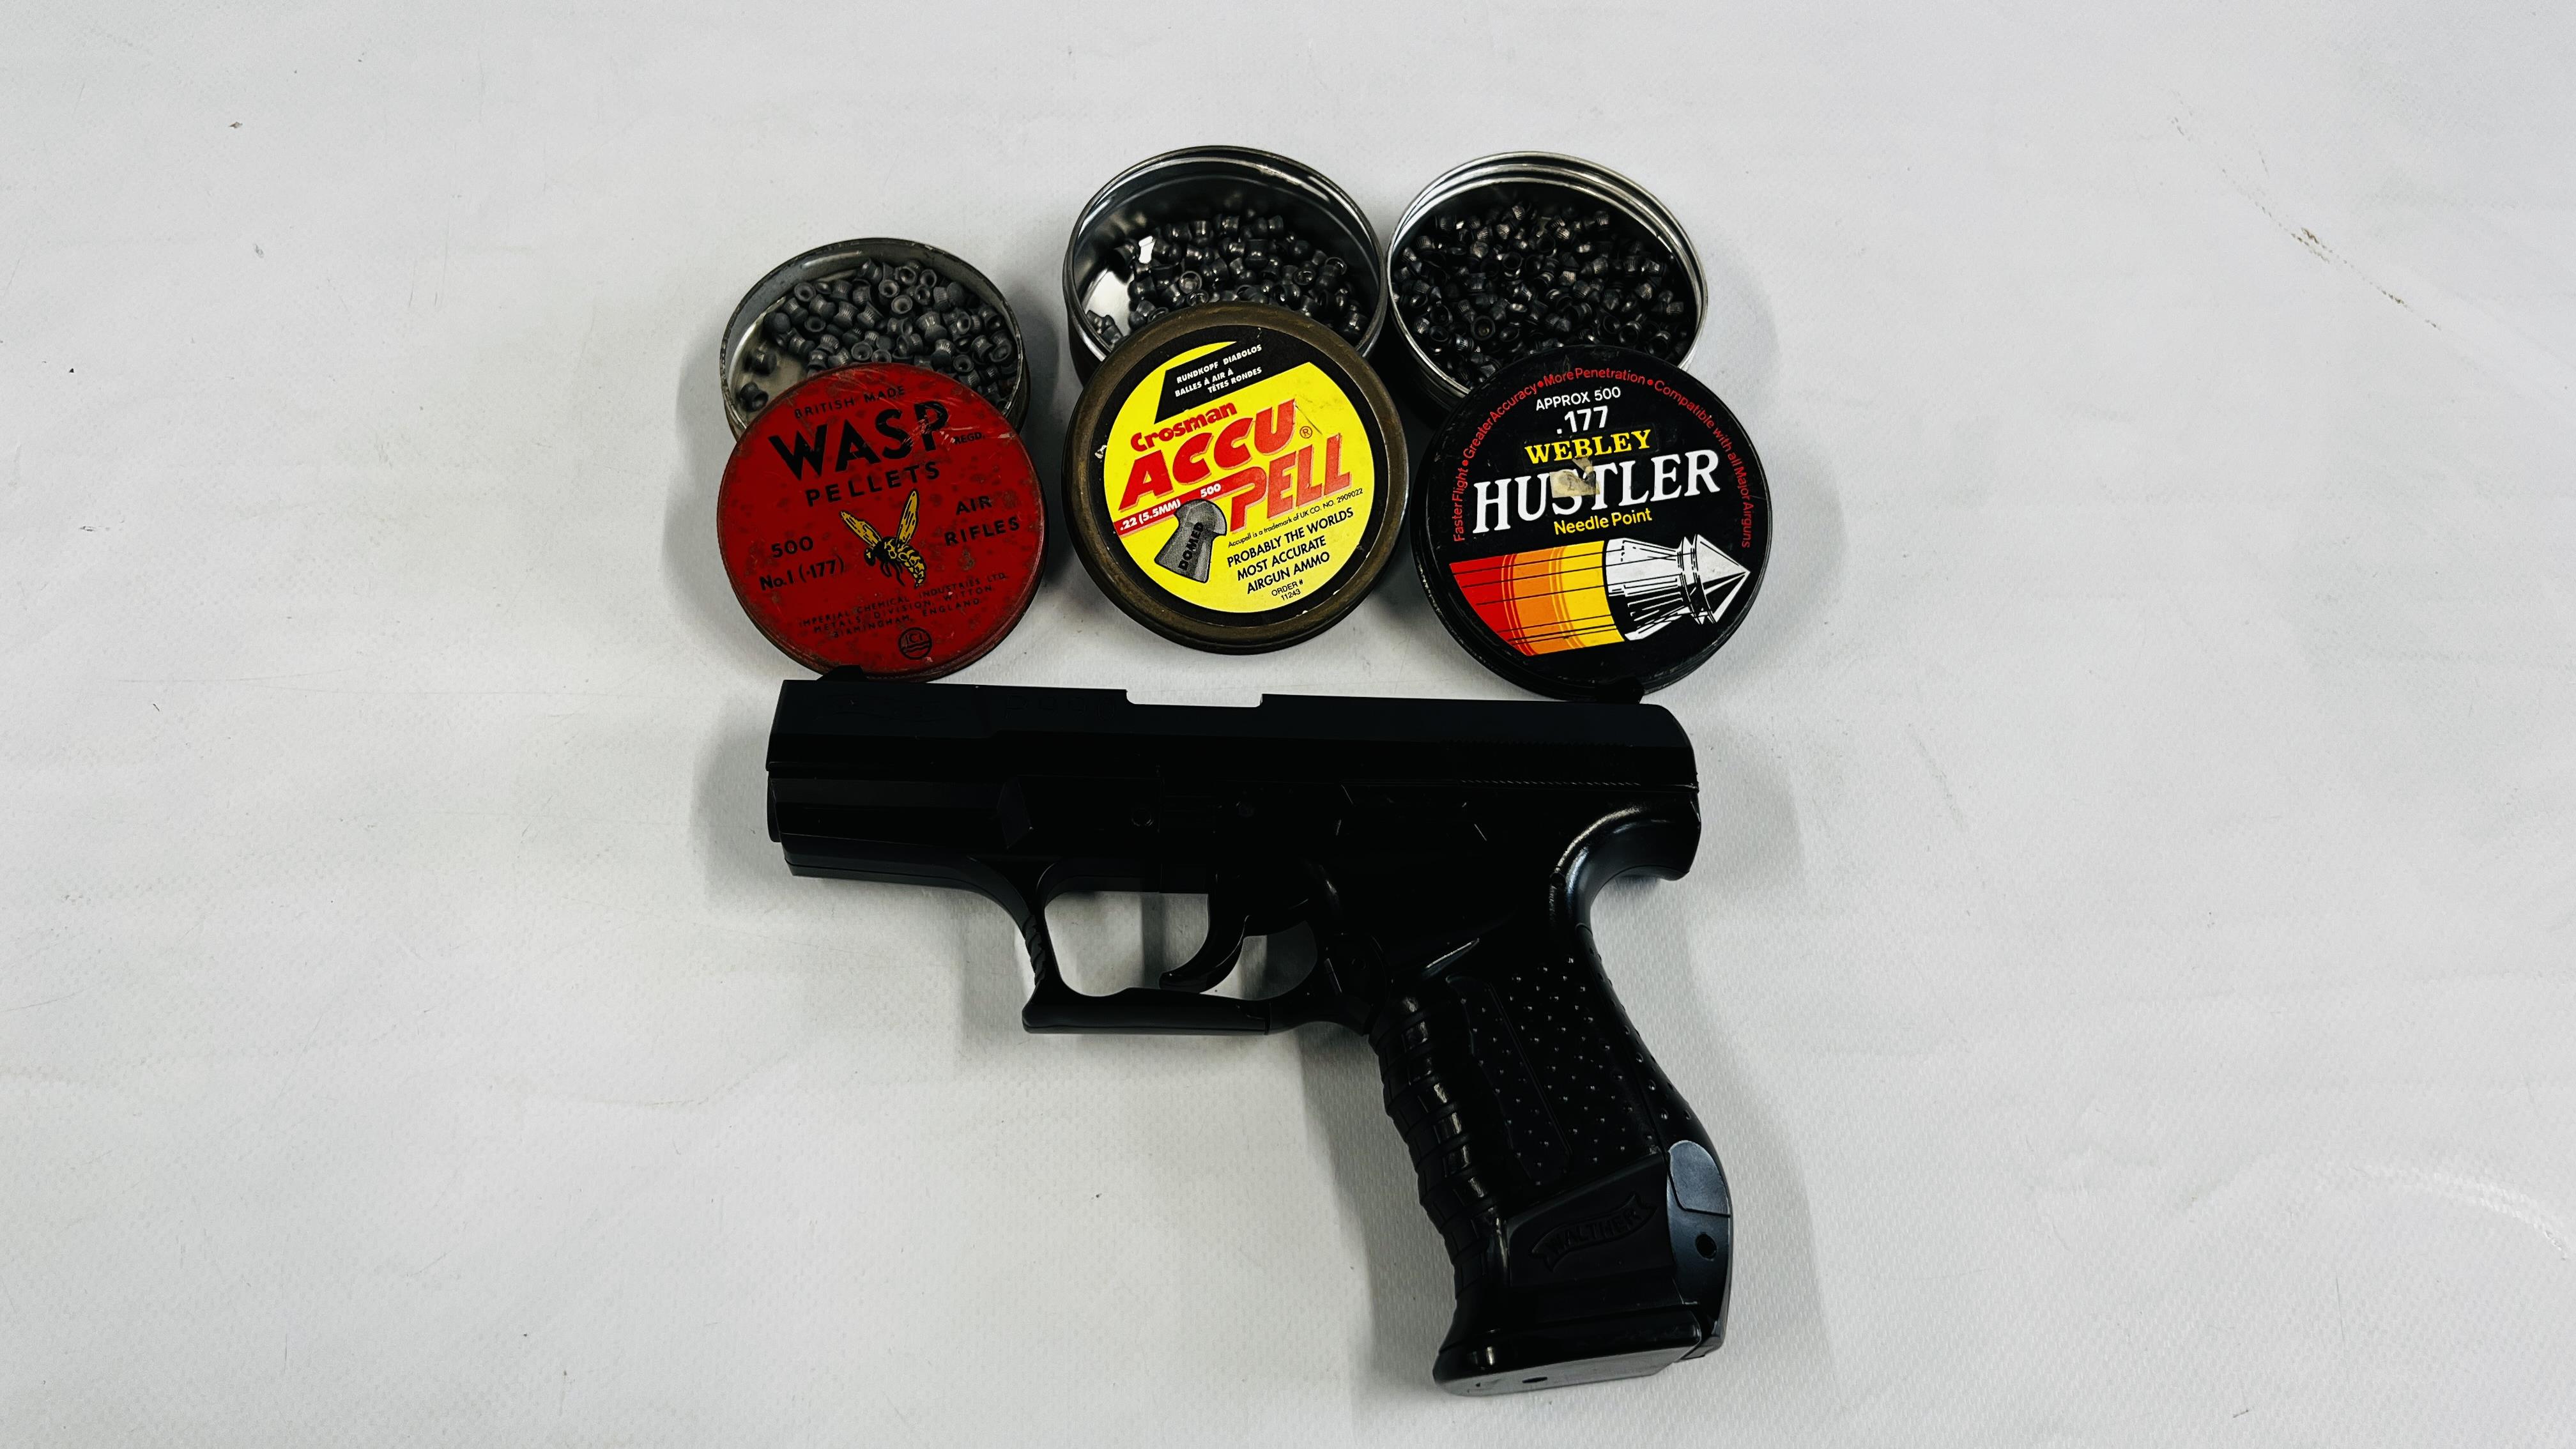 WALTHER P990 BB AIR PISTOL PLUS THREE VARIOUS PART TINS OF AIR RIFLE PELLETS - TO BE COLLECTED IN